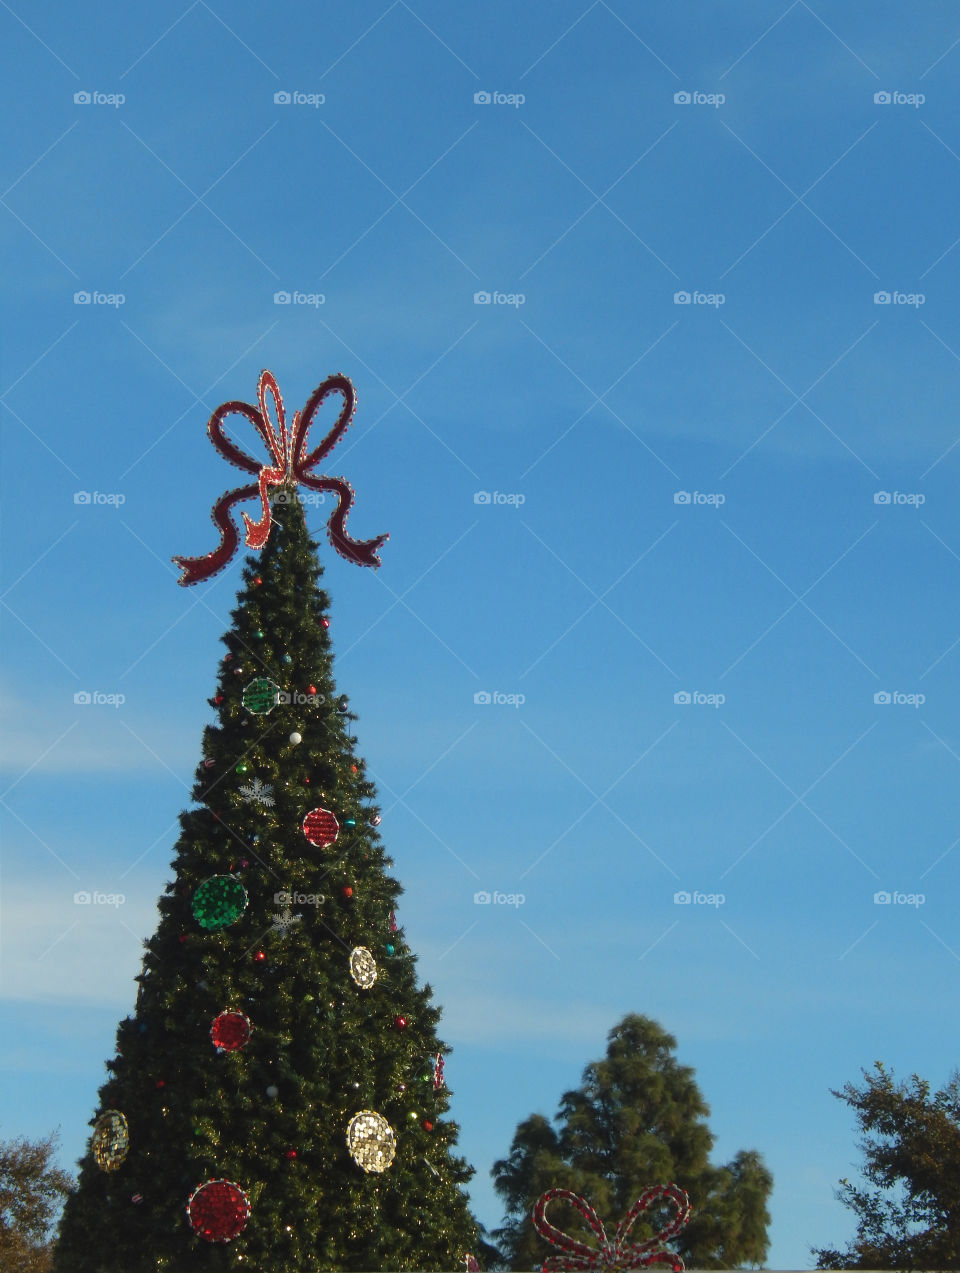 Christmas tree with decorations. Can be used as a background to send X'mas greetings